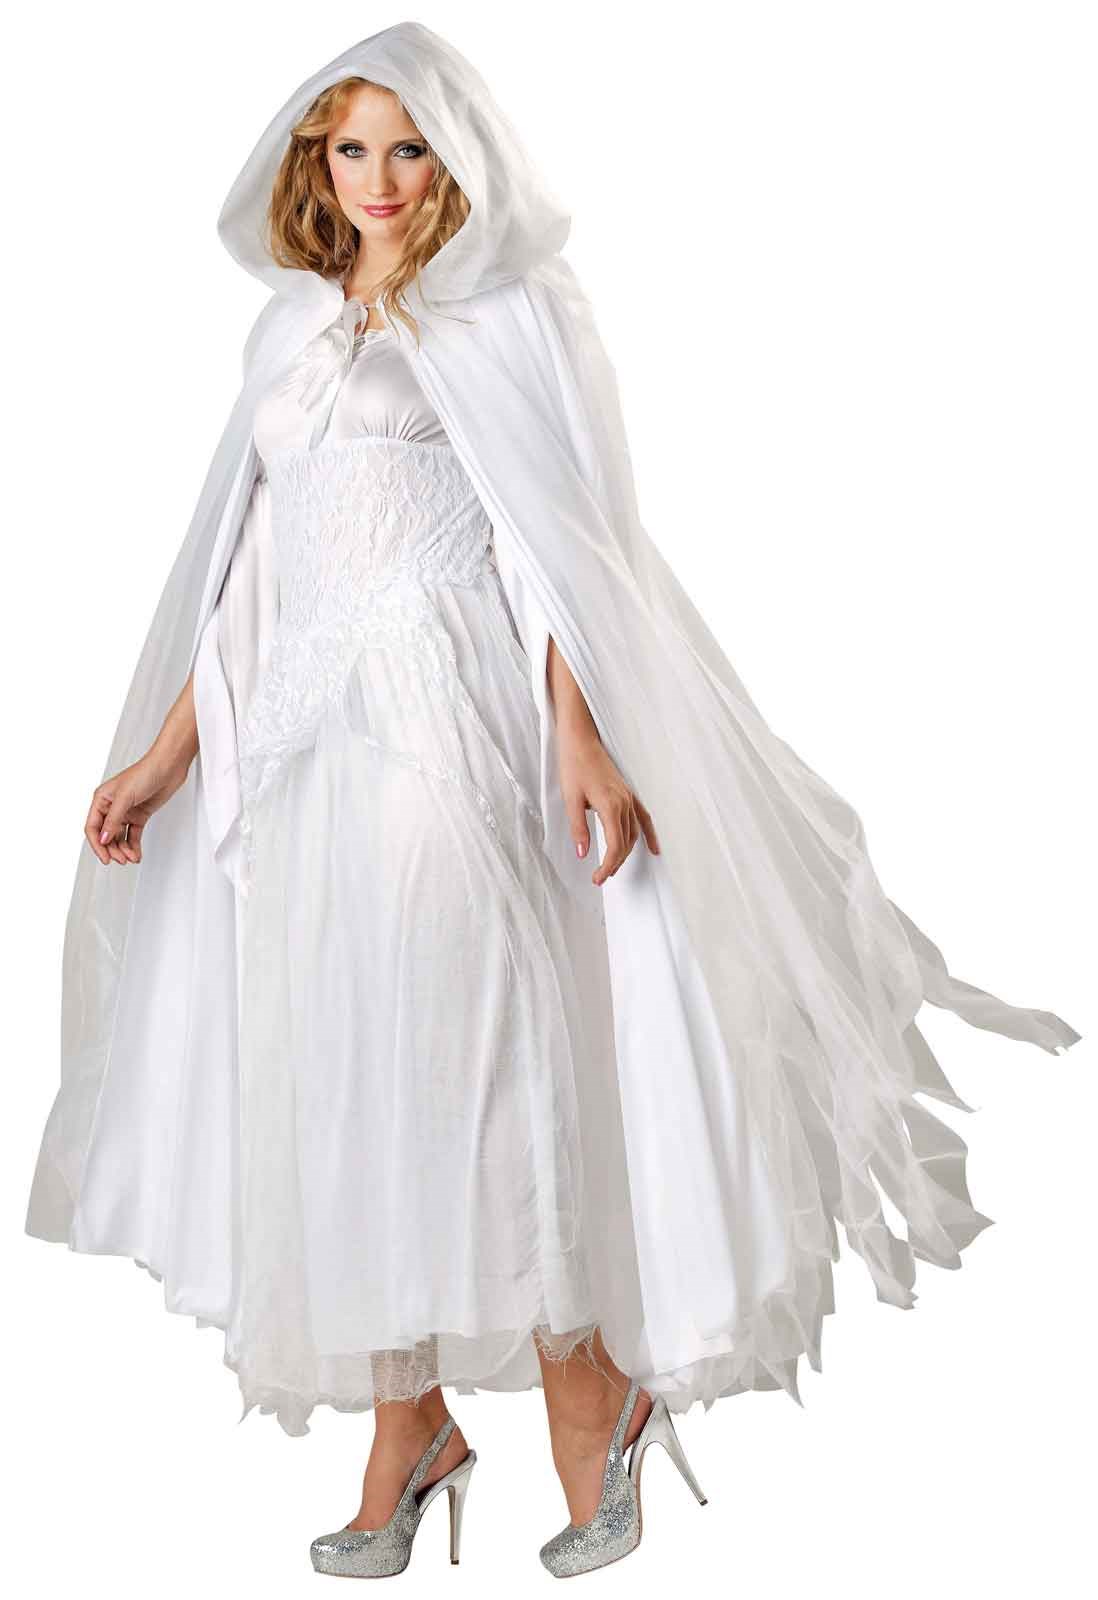 Haunted Ghostly White Costume Cape